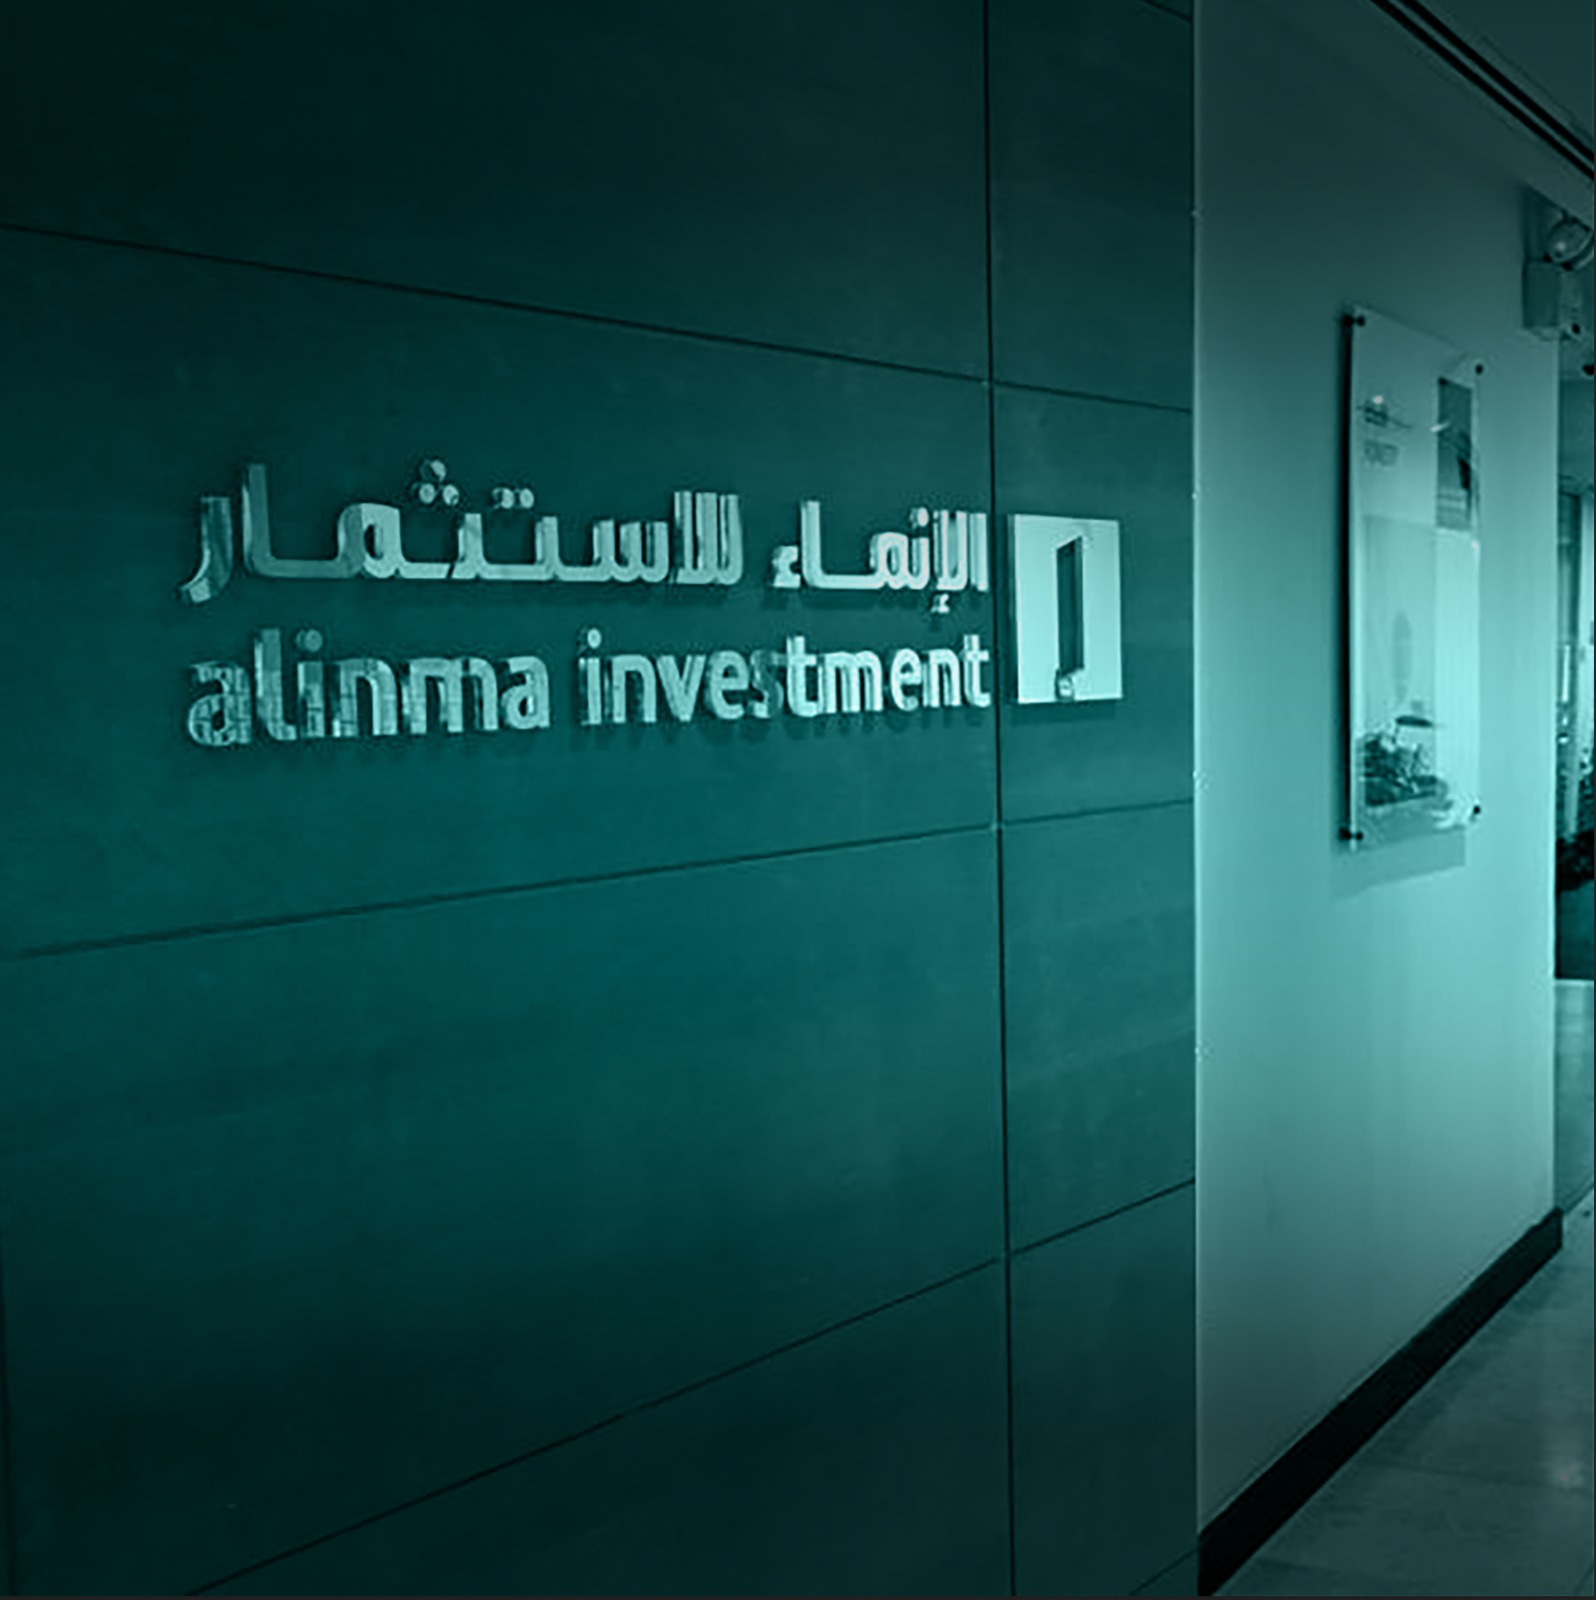 Non fundamental changes to Alinma Saudi Equity Fund